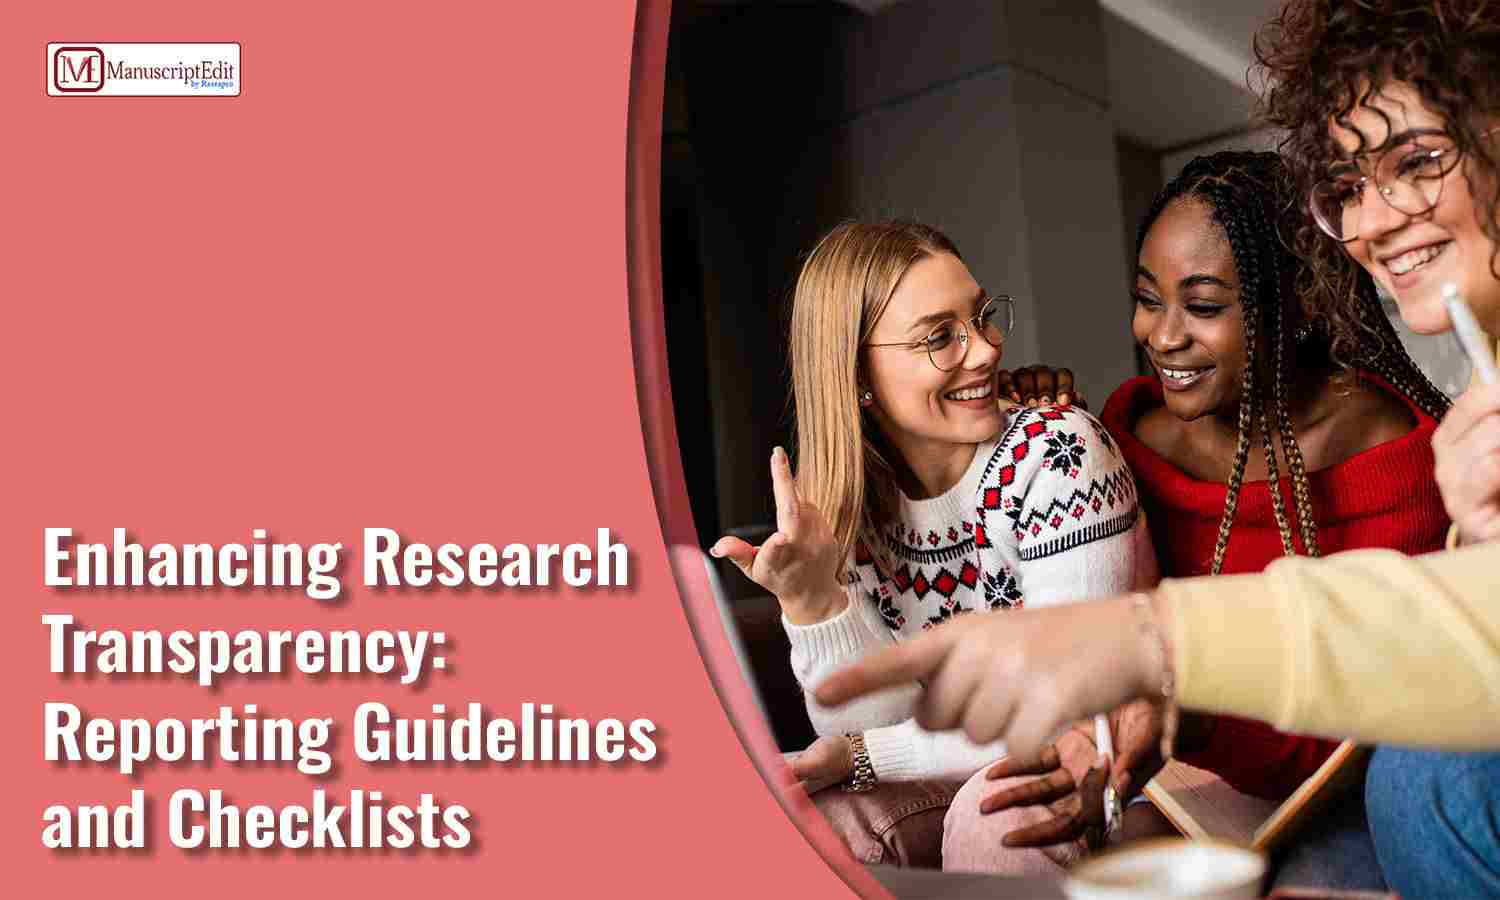 Enhancing Research Transparency: Reporting Guidelines and Checklists